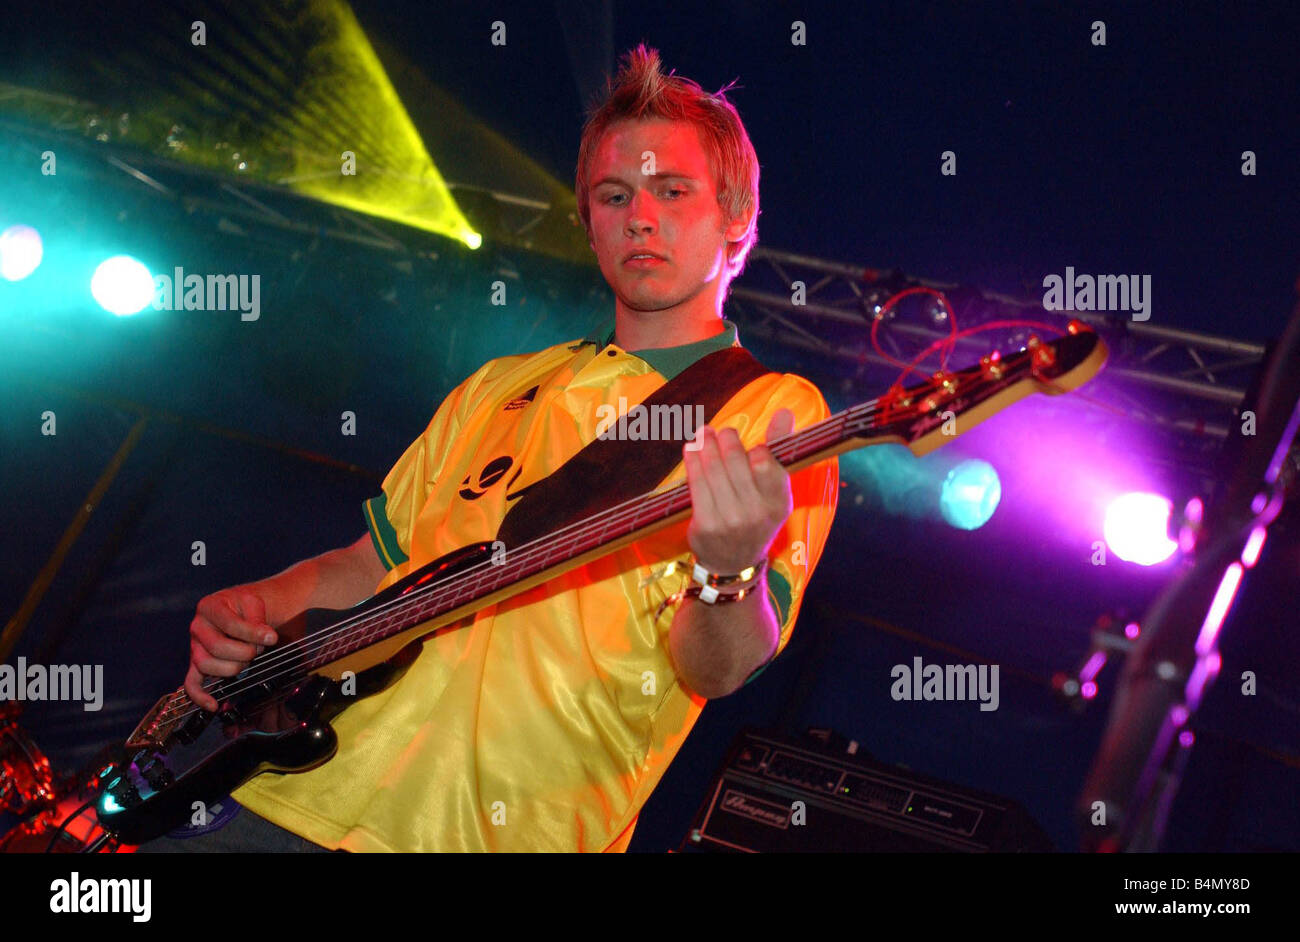 T in the Park 12th July 2003 Cowdenbeath striker Graeme Brown playing bass for his band Mydas at the T Break tent at T in the Park Graeme is wearing his Cowdenbeath top T in the Park Mydas Graeme Brown Stock Photo